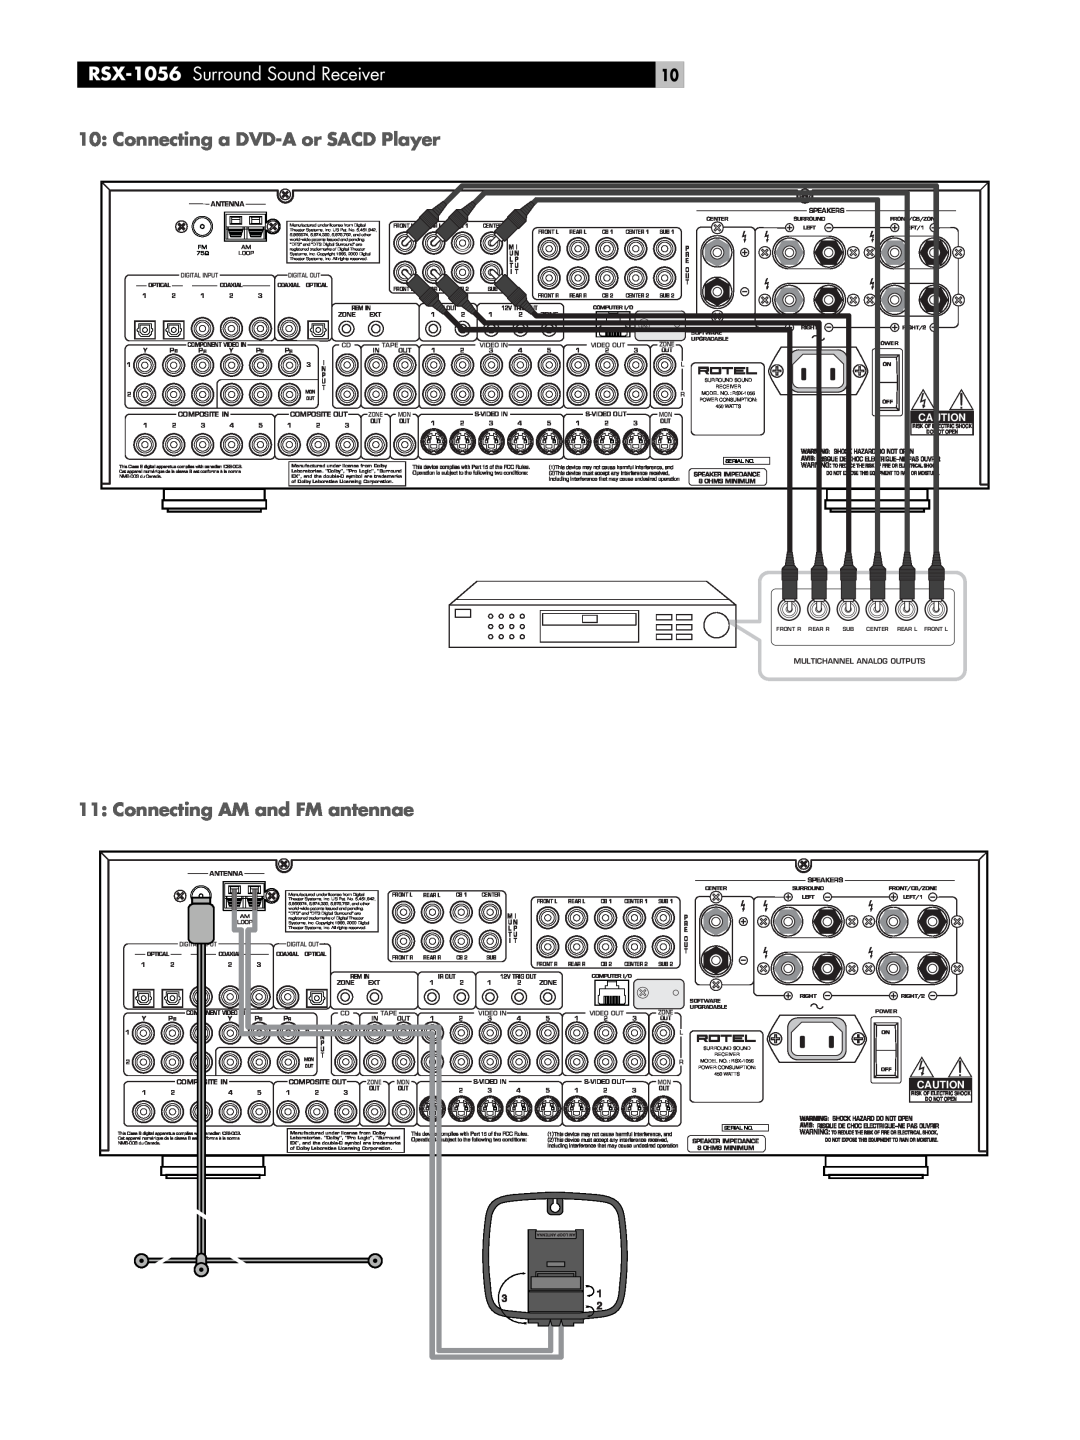 Rotel owner manual Connecting a DVD-Aor SACD Player, Connecting AM and FM antennae, RSX-1056 Surround Sound Receiver 